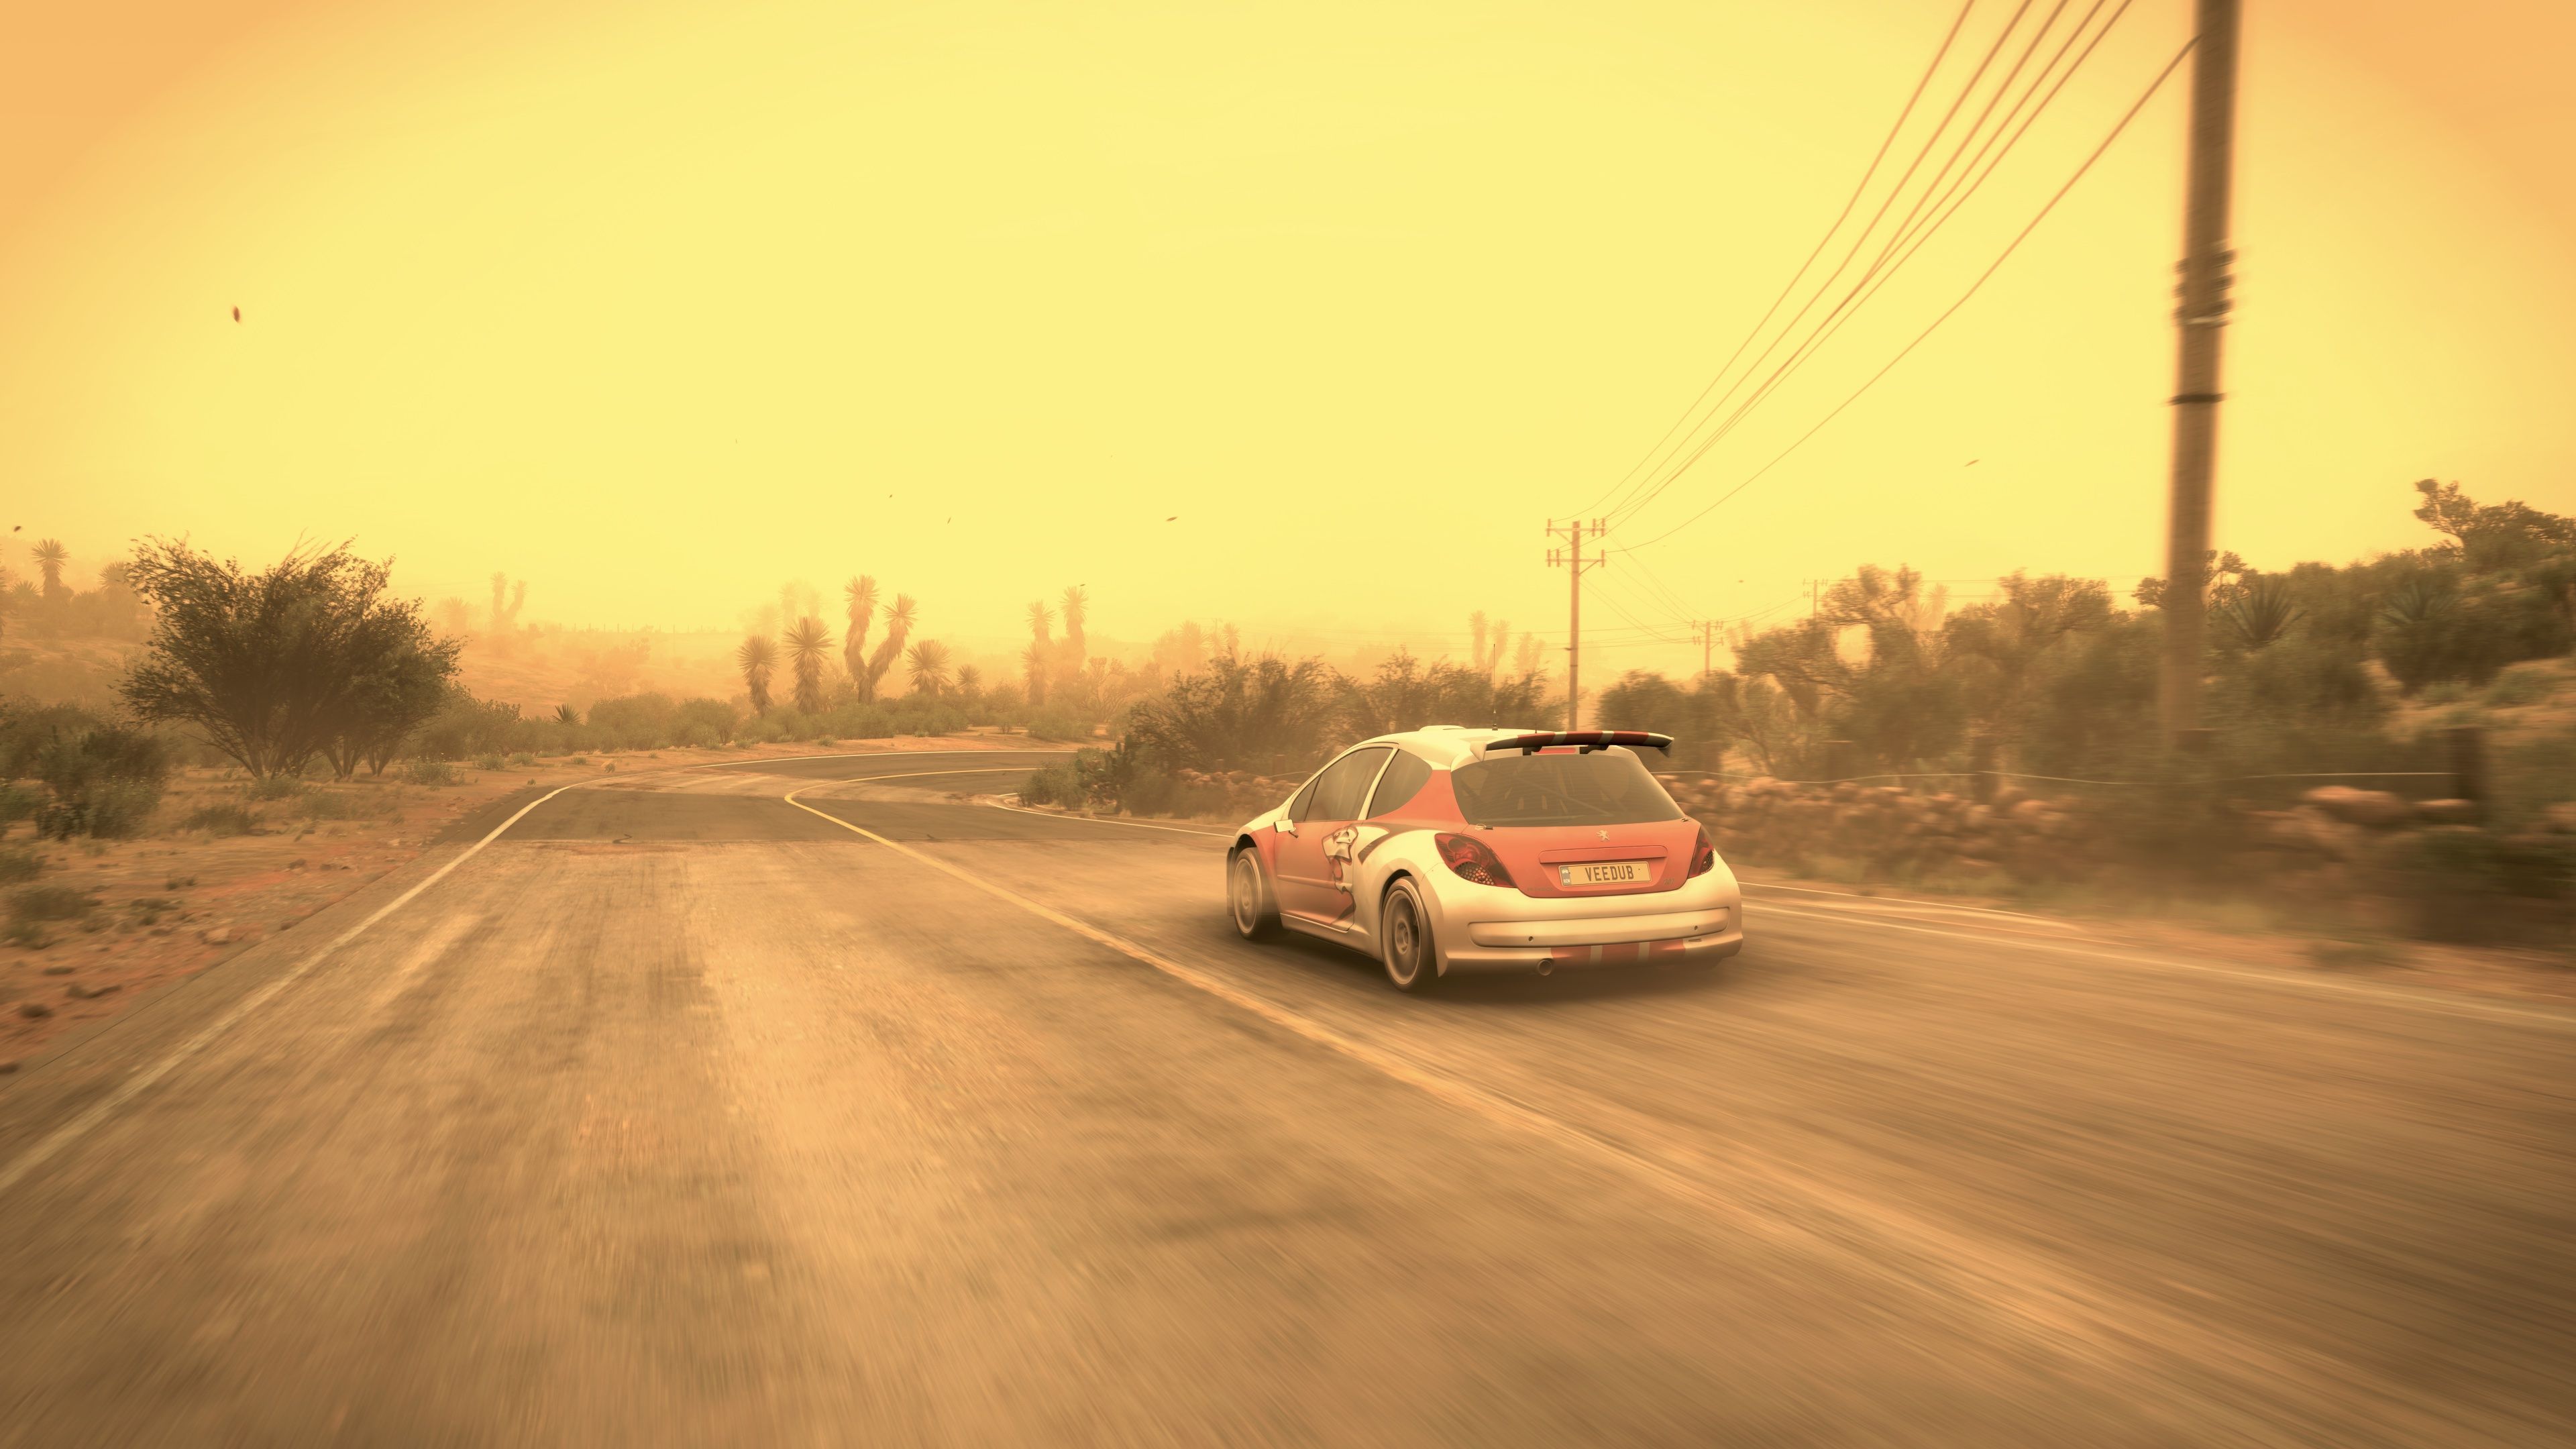 A screenshot from Forza Horizon 5 taken from the rear three-quarter profile of my rally-spec Peugeot 207 hatchback. The car is blasting along a rather rough-looking road that's curving off to the right, with cactuses and scrappy bushes along both sides of it. The whole scene is tinted yellow because there's a huge dust storm blowing through, the sky is completely yellow, and there's very little visibility past the closest tree line. There's even a few pieces of leaf litter blowing around in the wind.